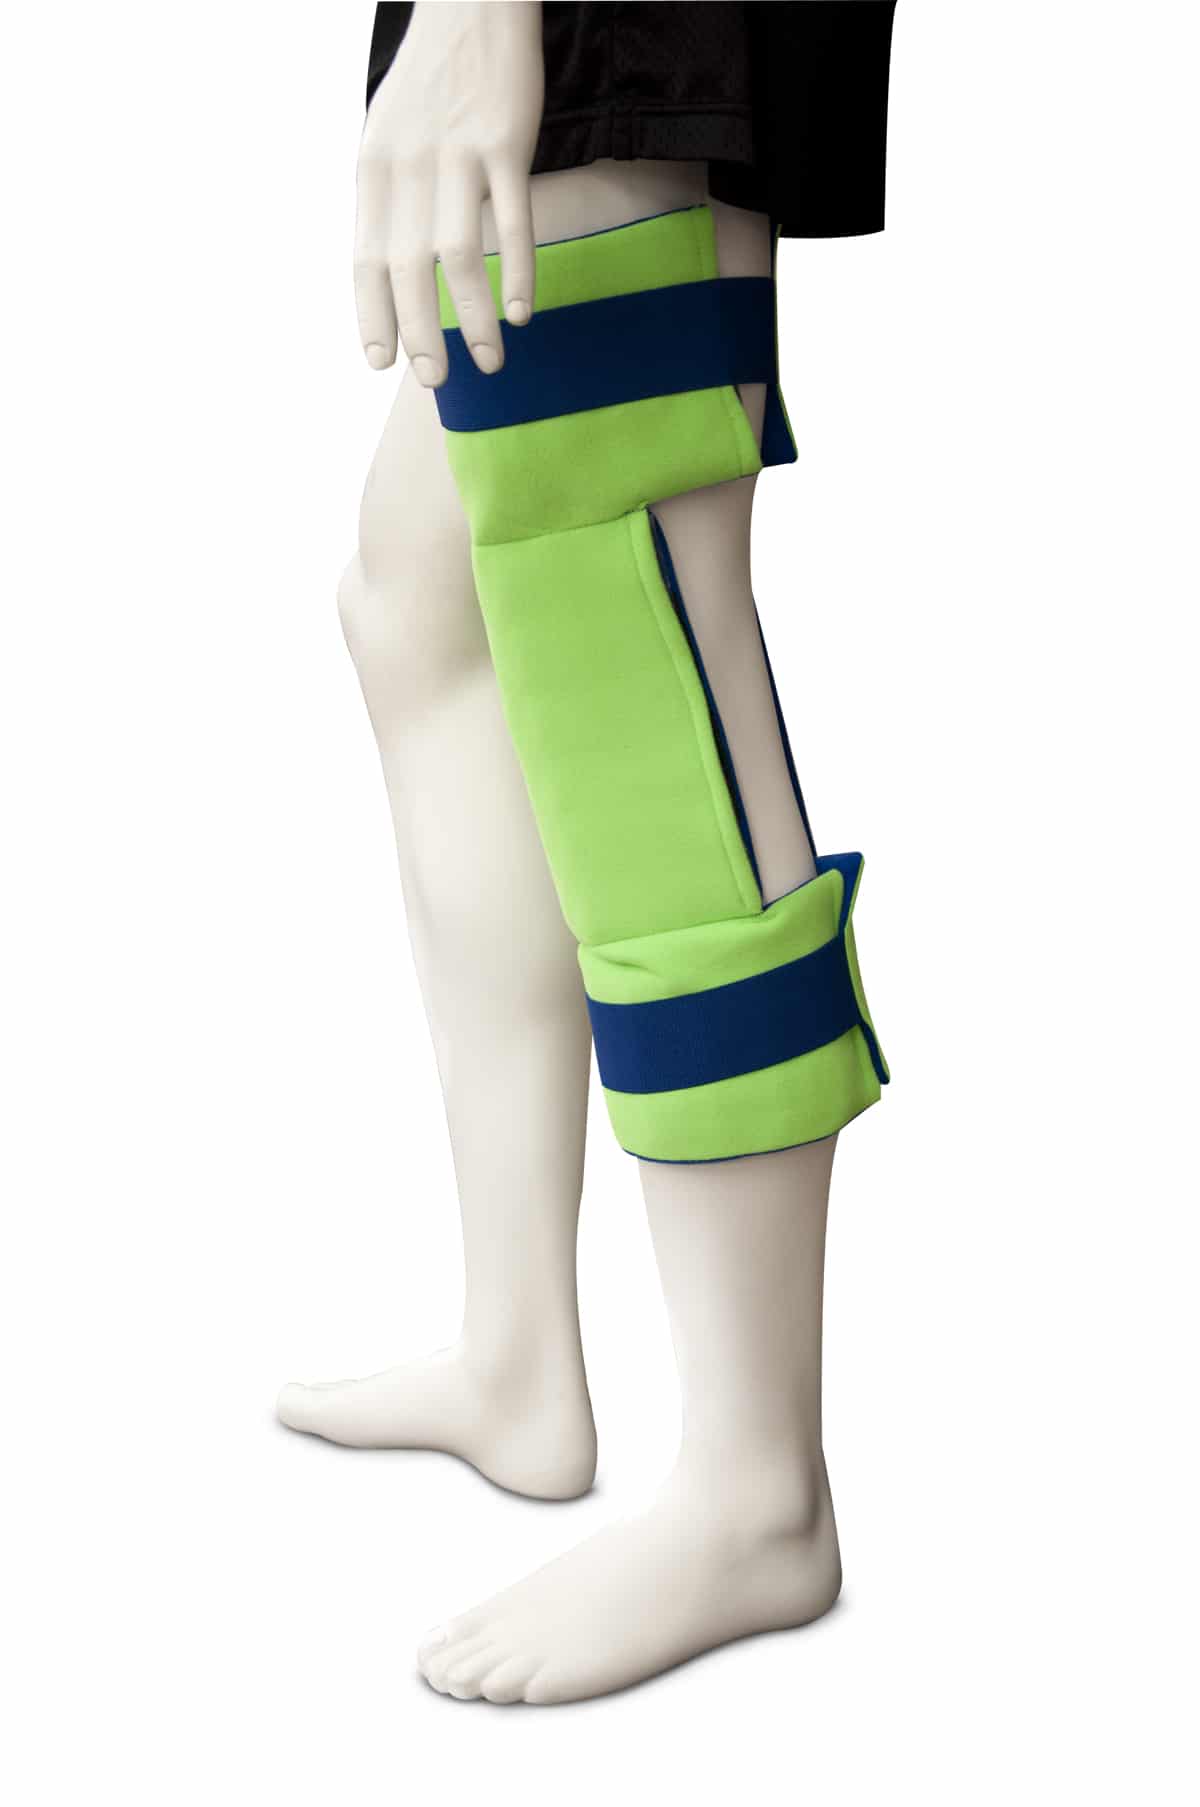 CPM Knee Wrap - Arthritis Supports Australia: Quality Support Products for  Arthritis Relief